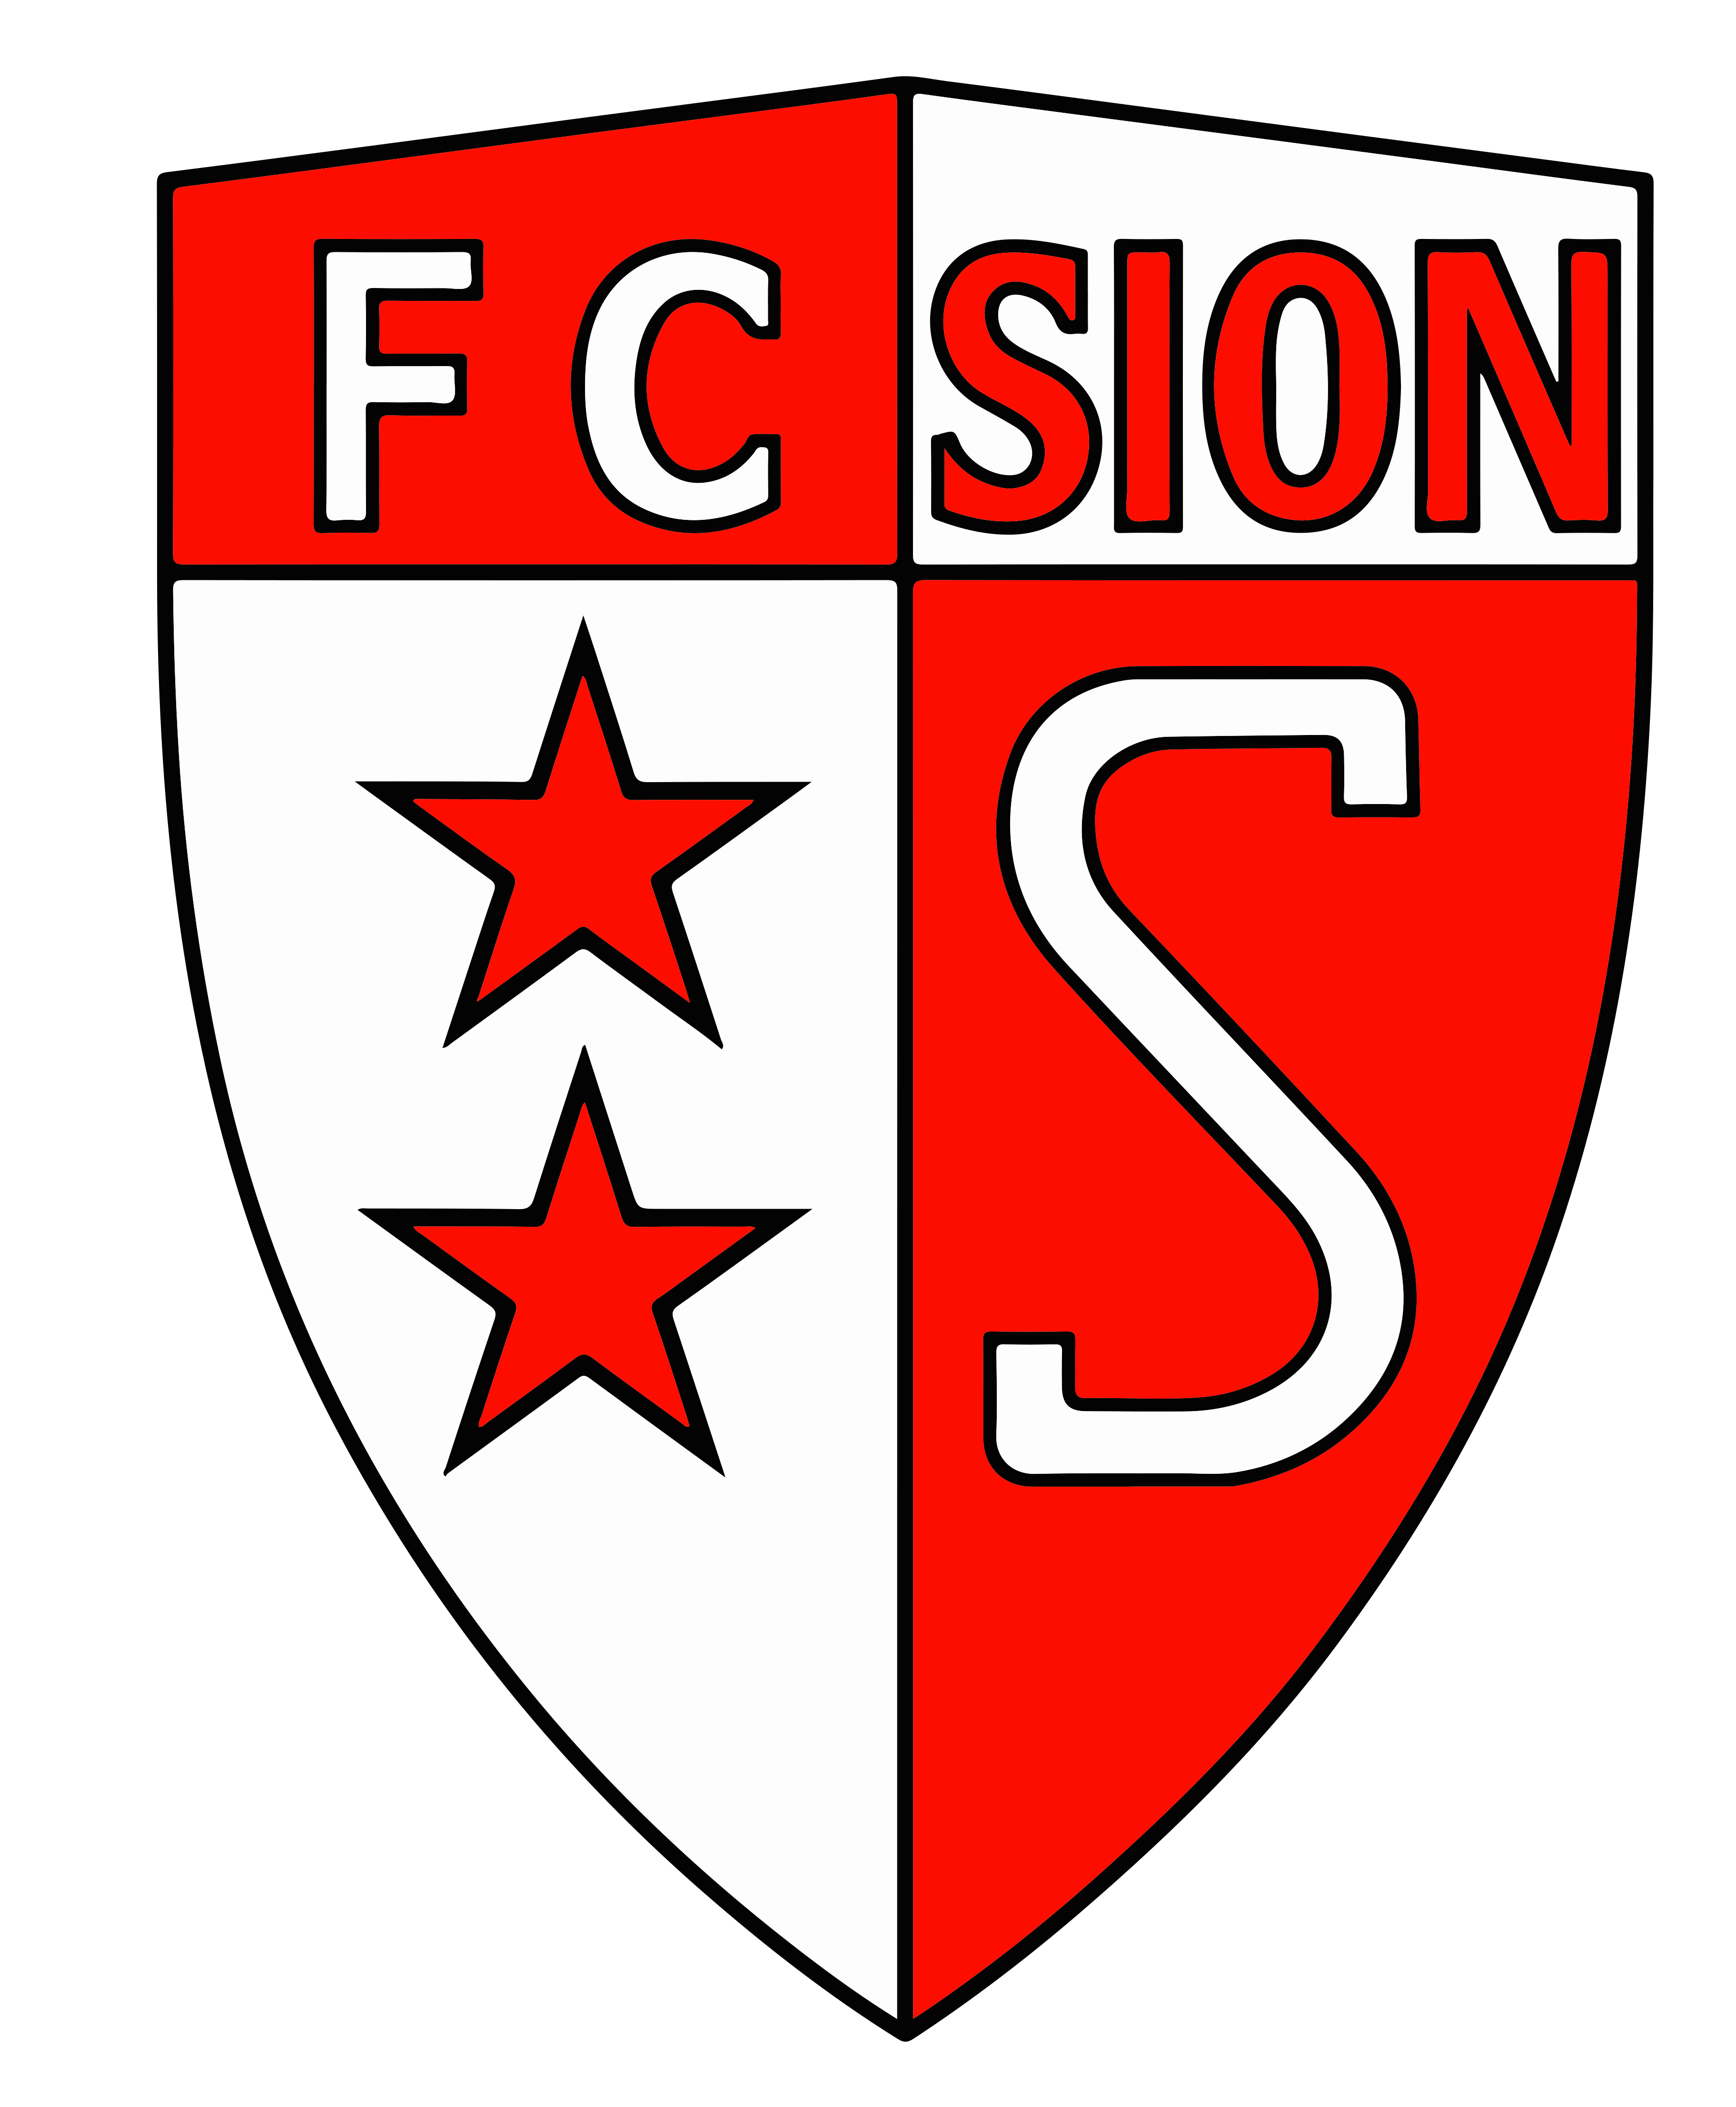 Logo 5 official FC Sion jerseys to win